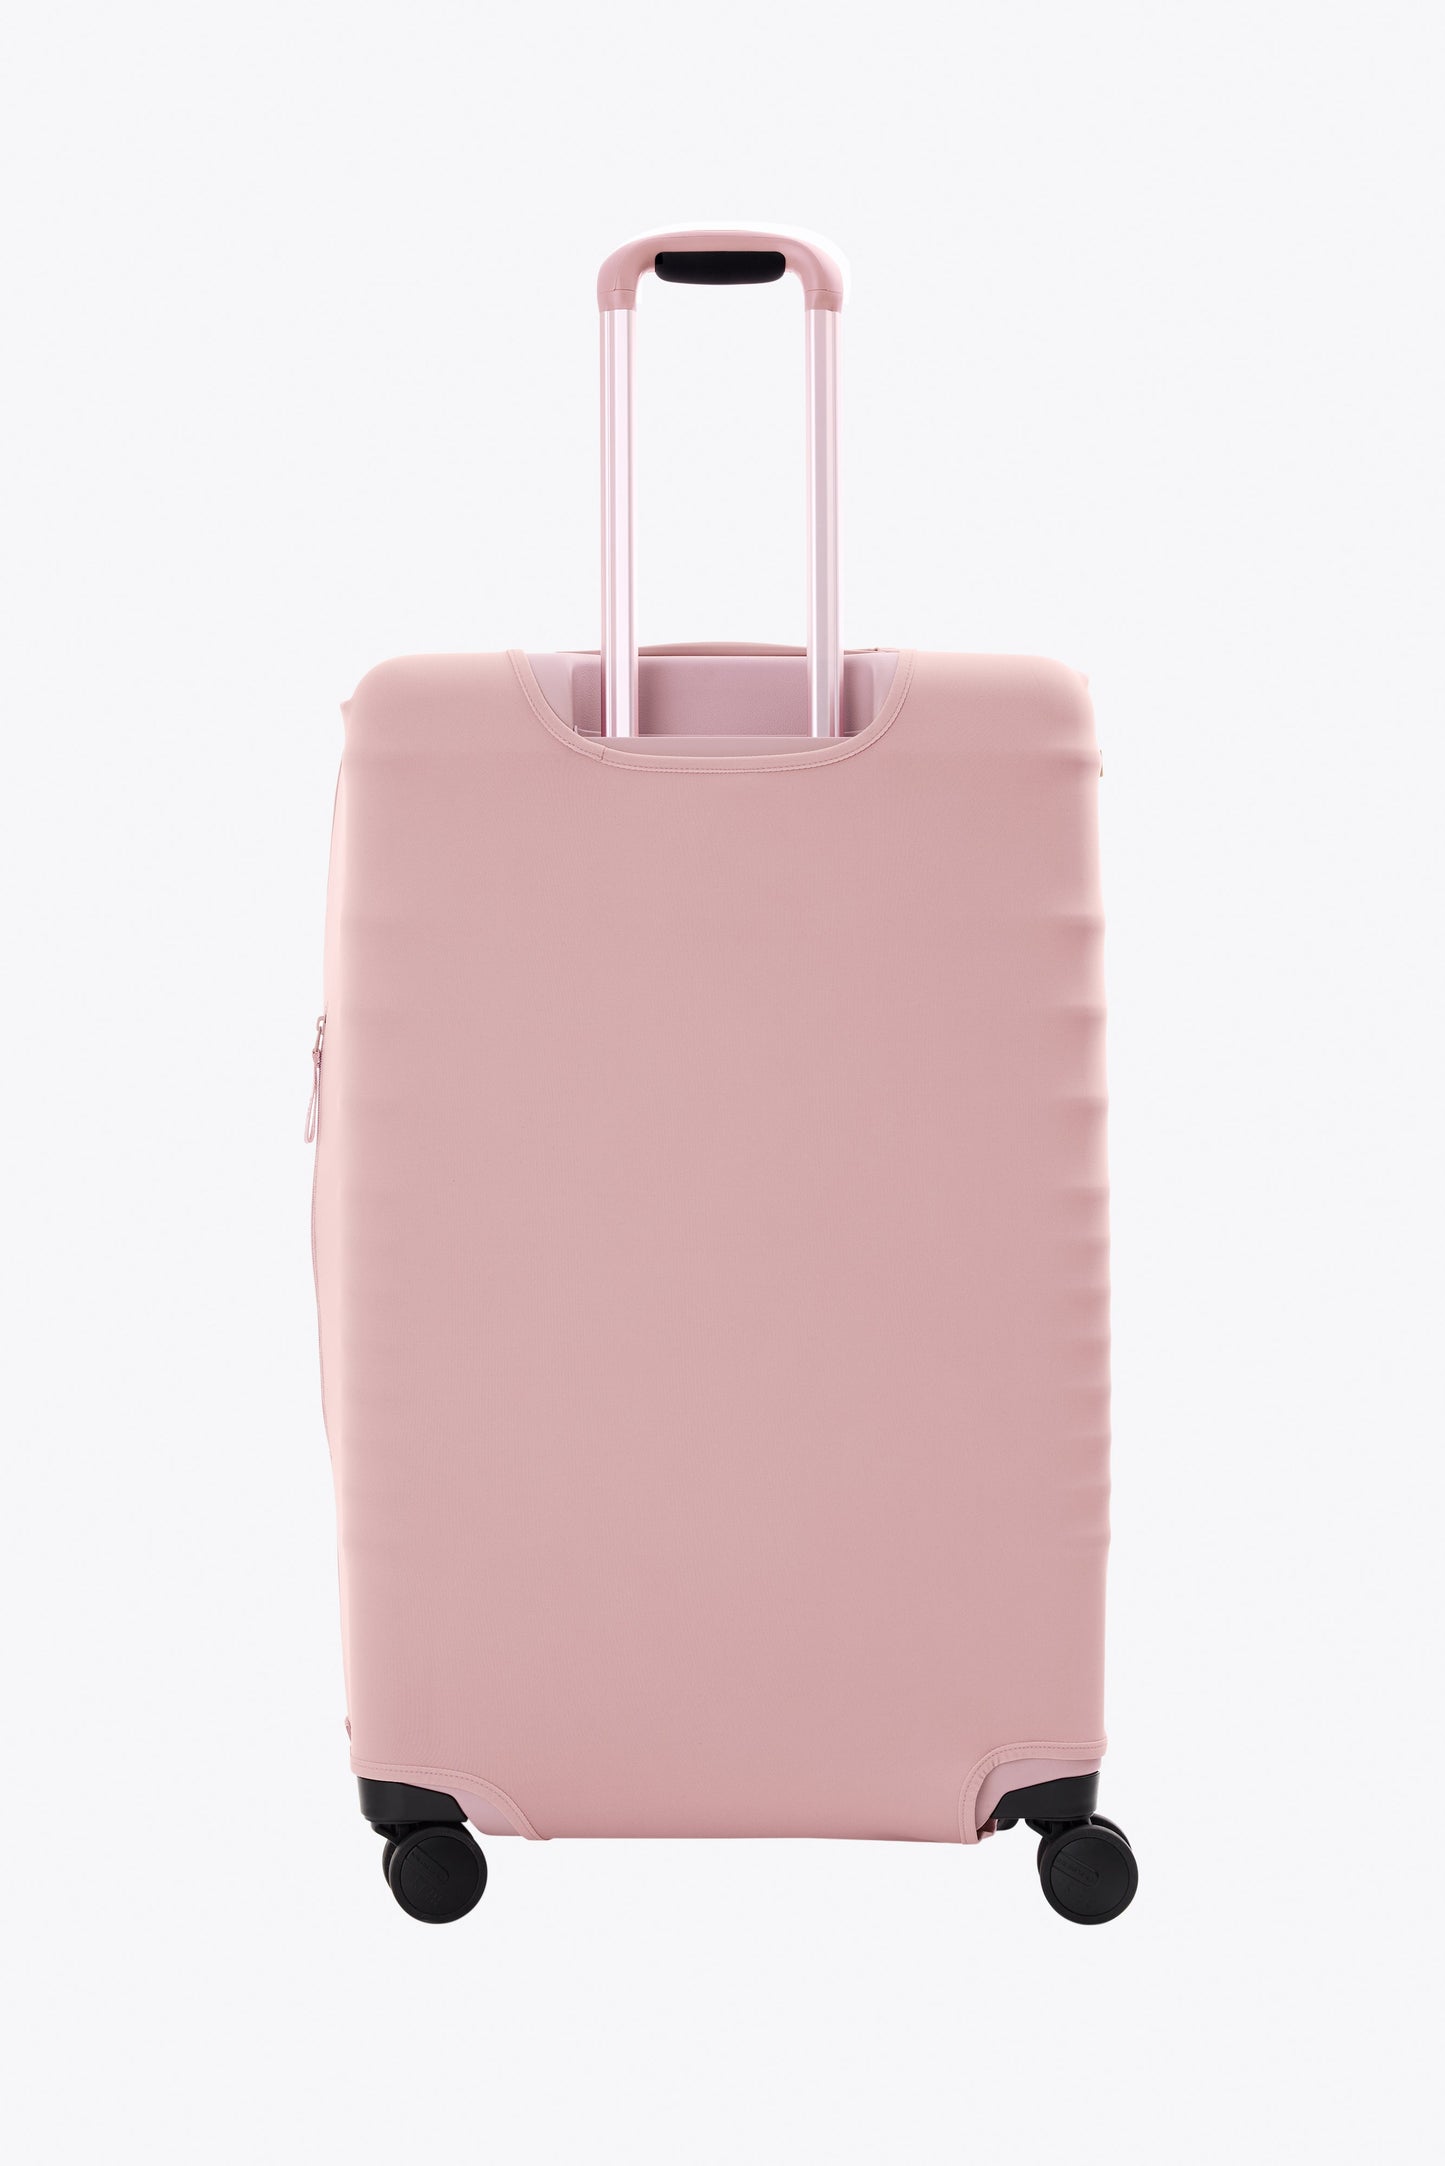 The Large Check-In Luggage Cover in Atlas Pink